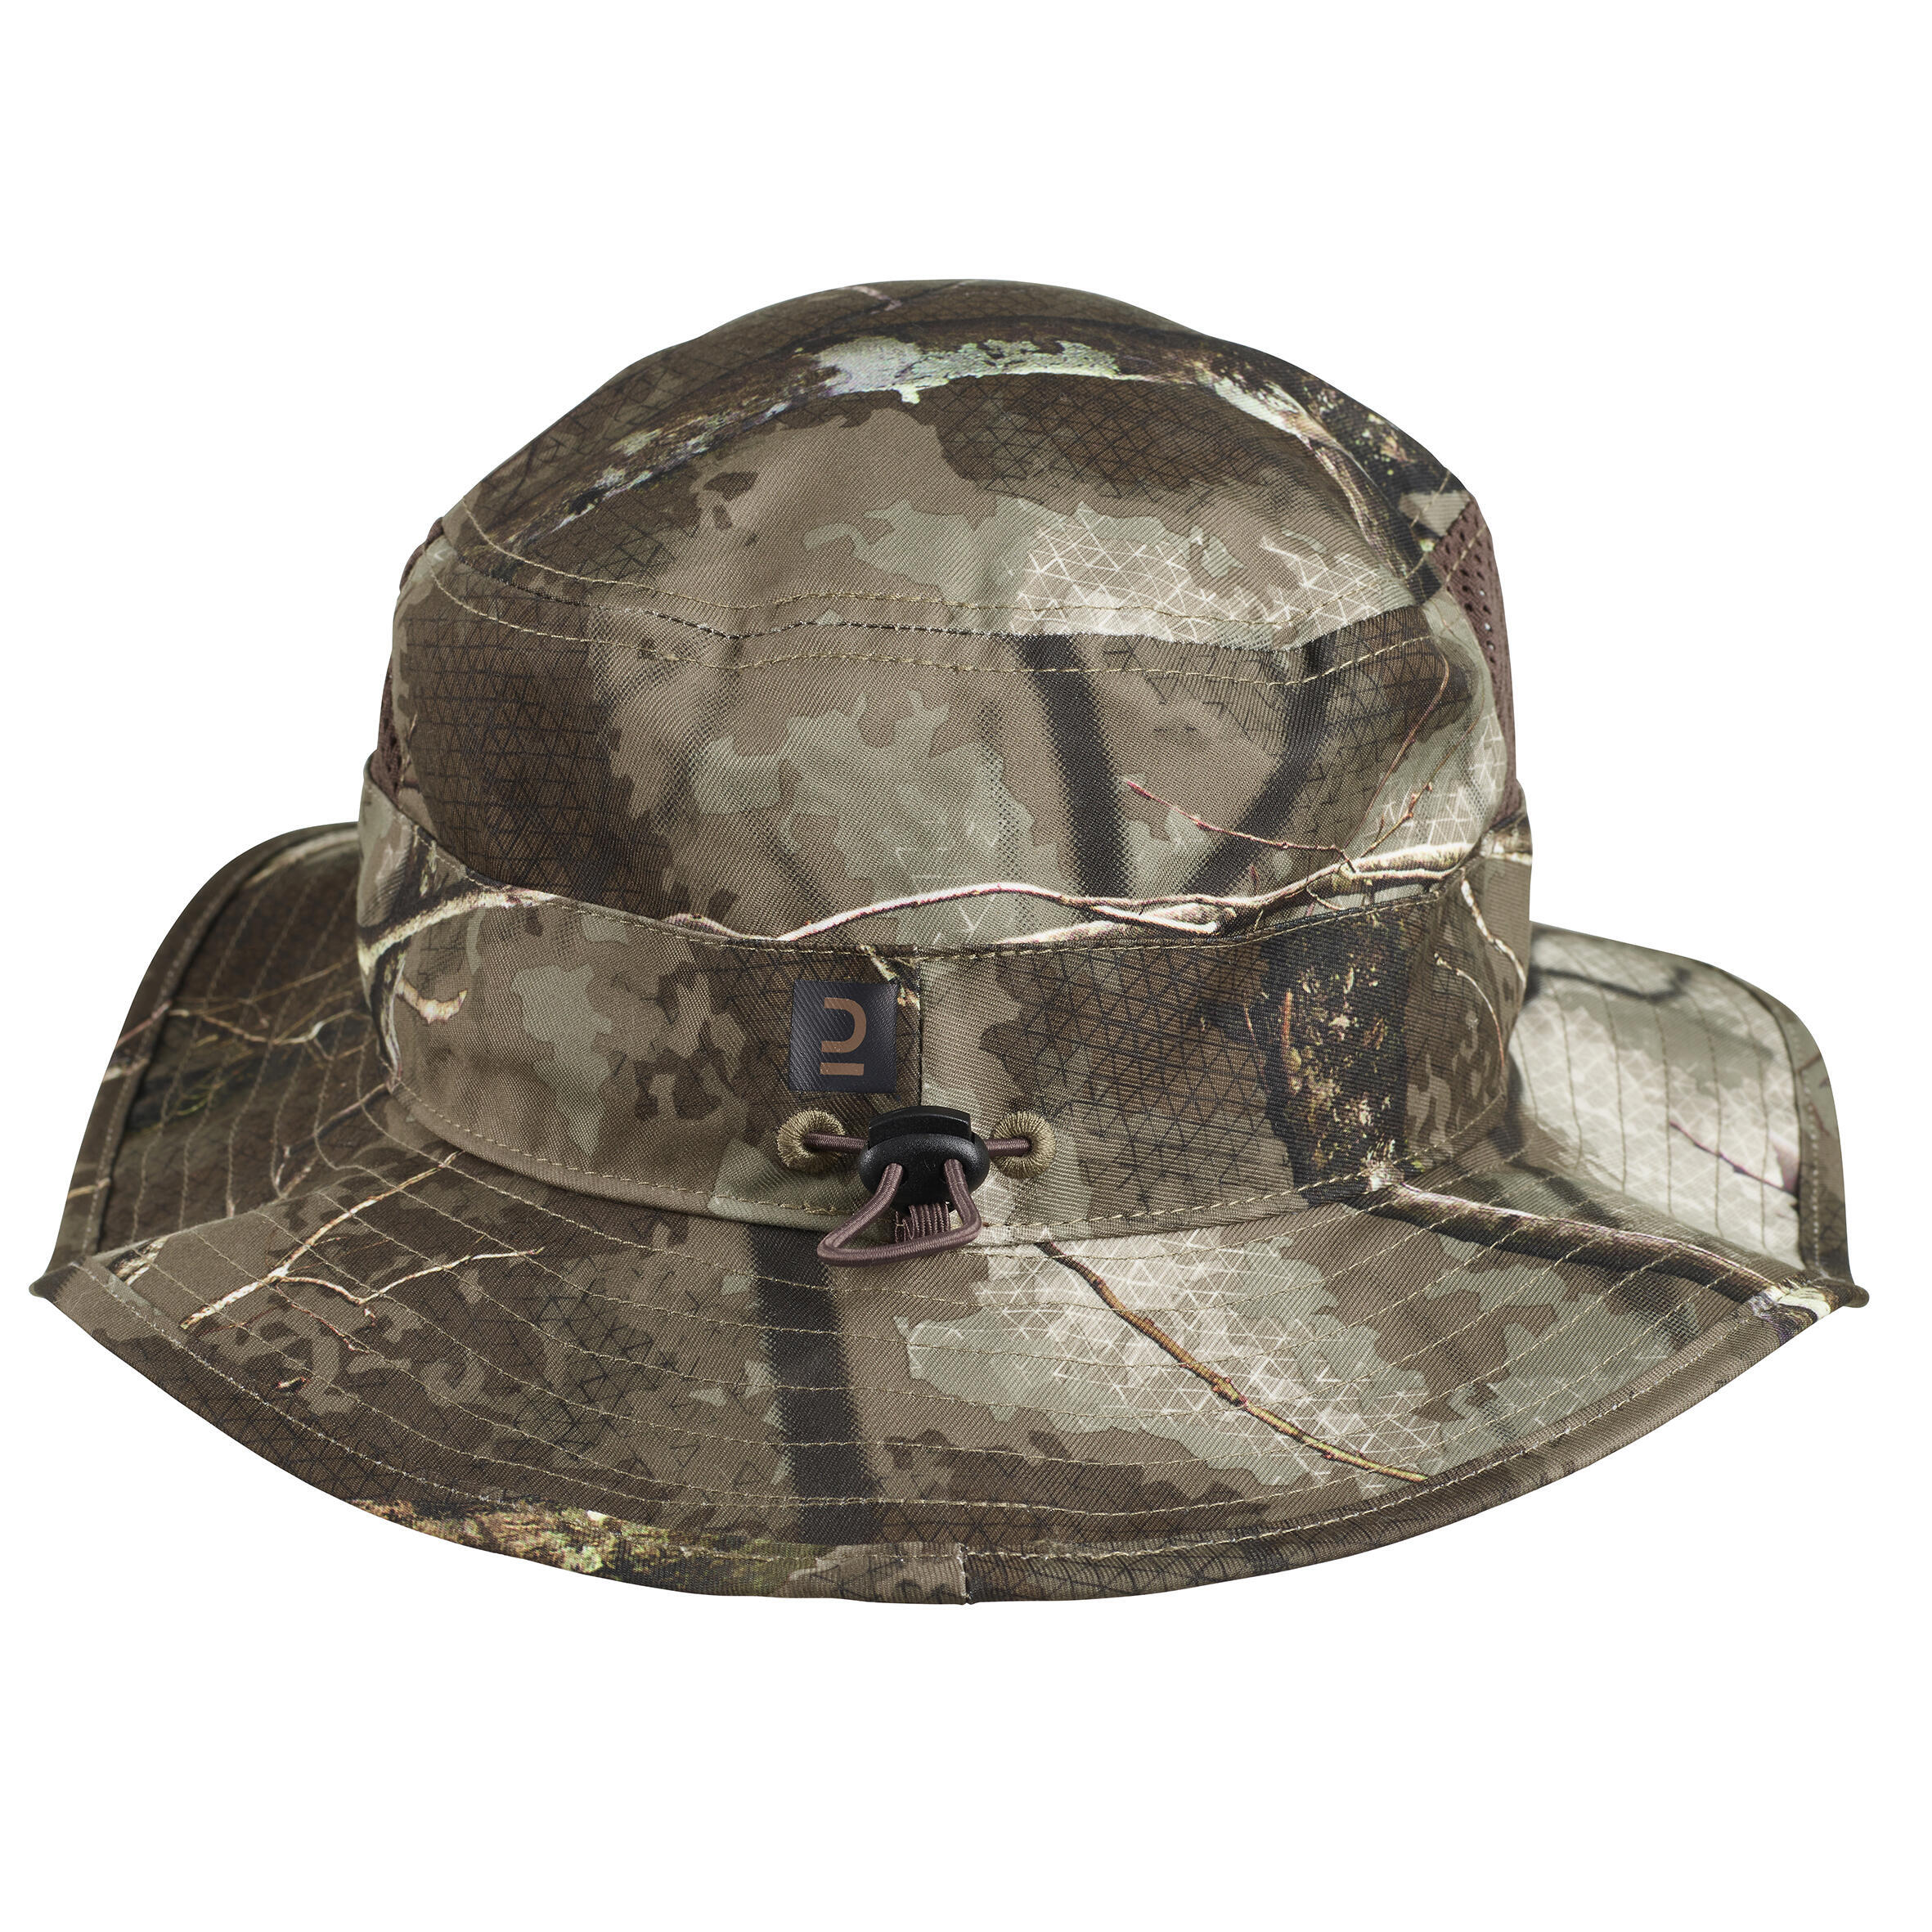 Breathable Country Sport Bob Hat Treemetic 500 Camouflage 4/11